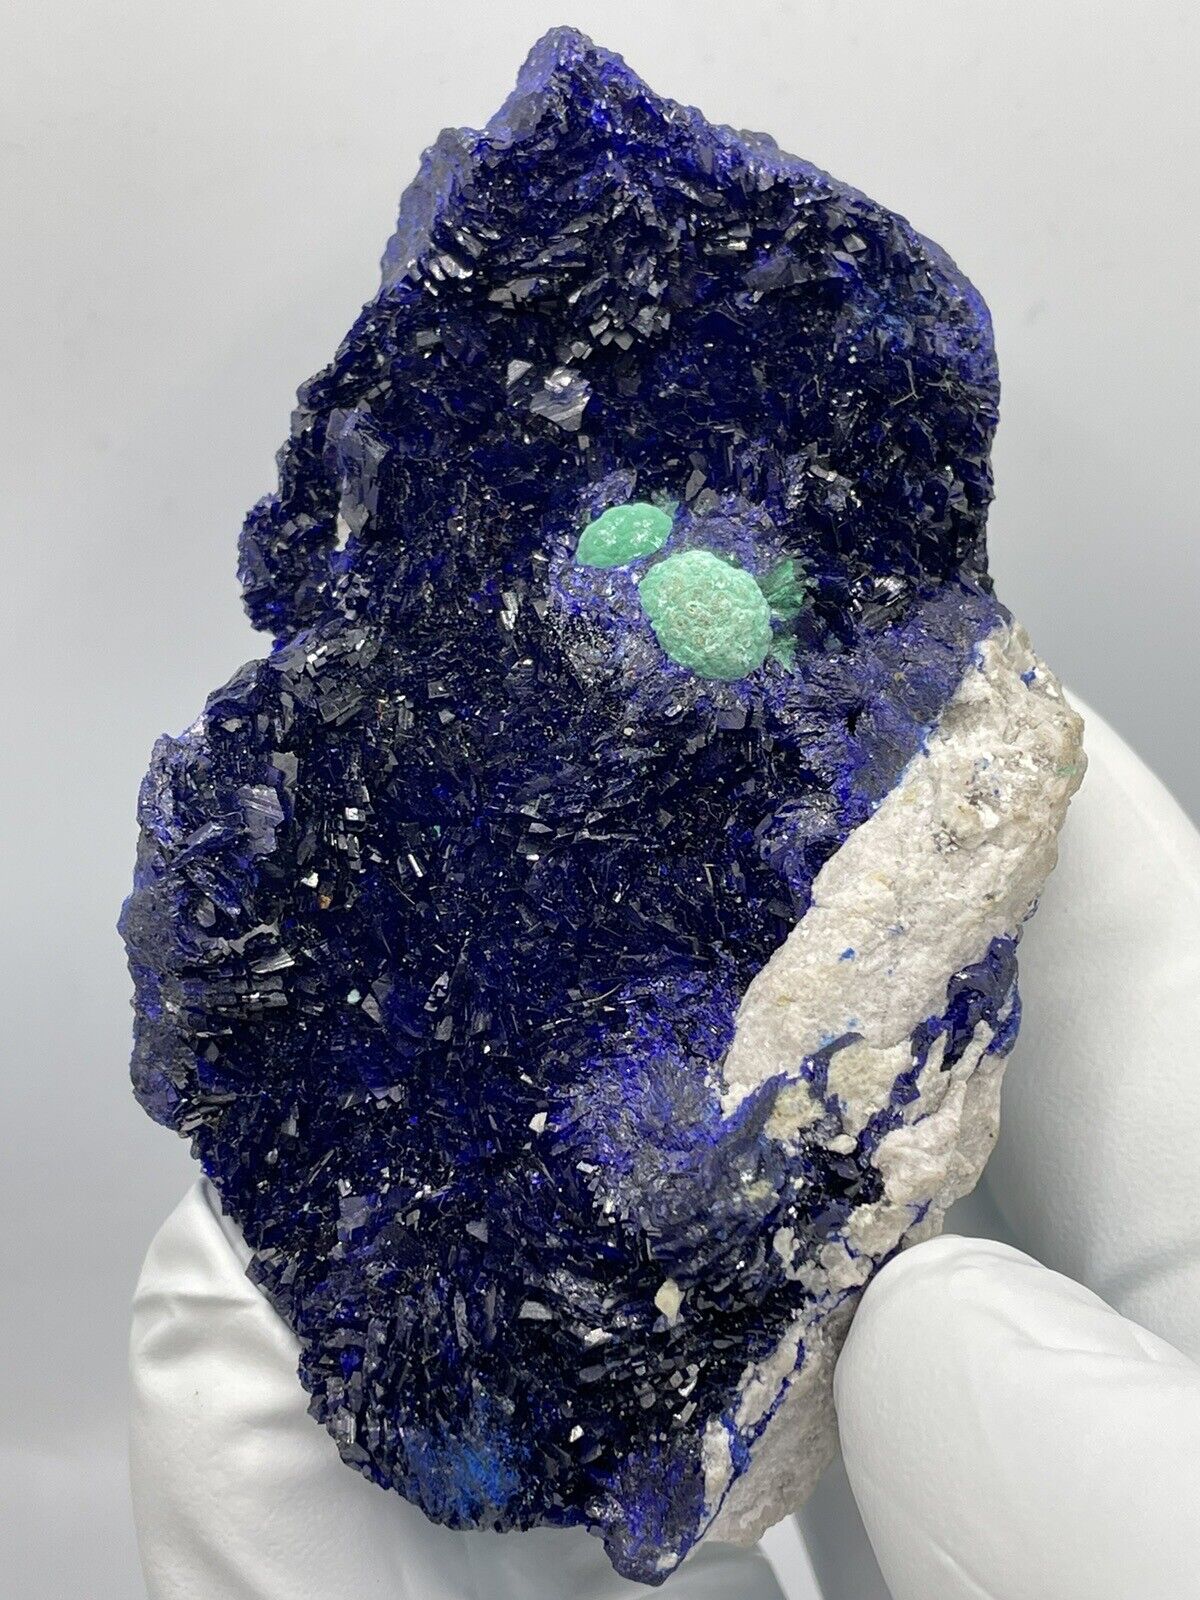 192g Rare Aesthetic Azurite With Botryoidal Malachite From Milpillas Mine Mexico